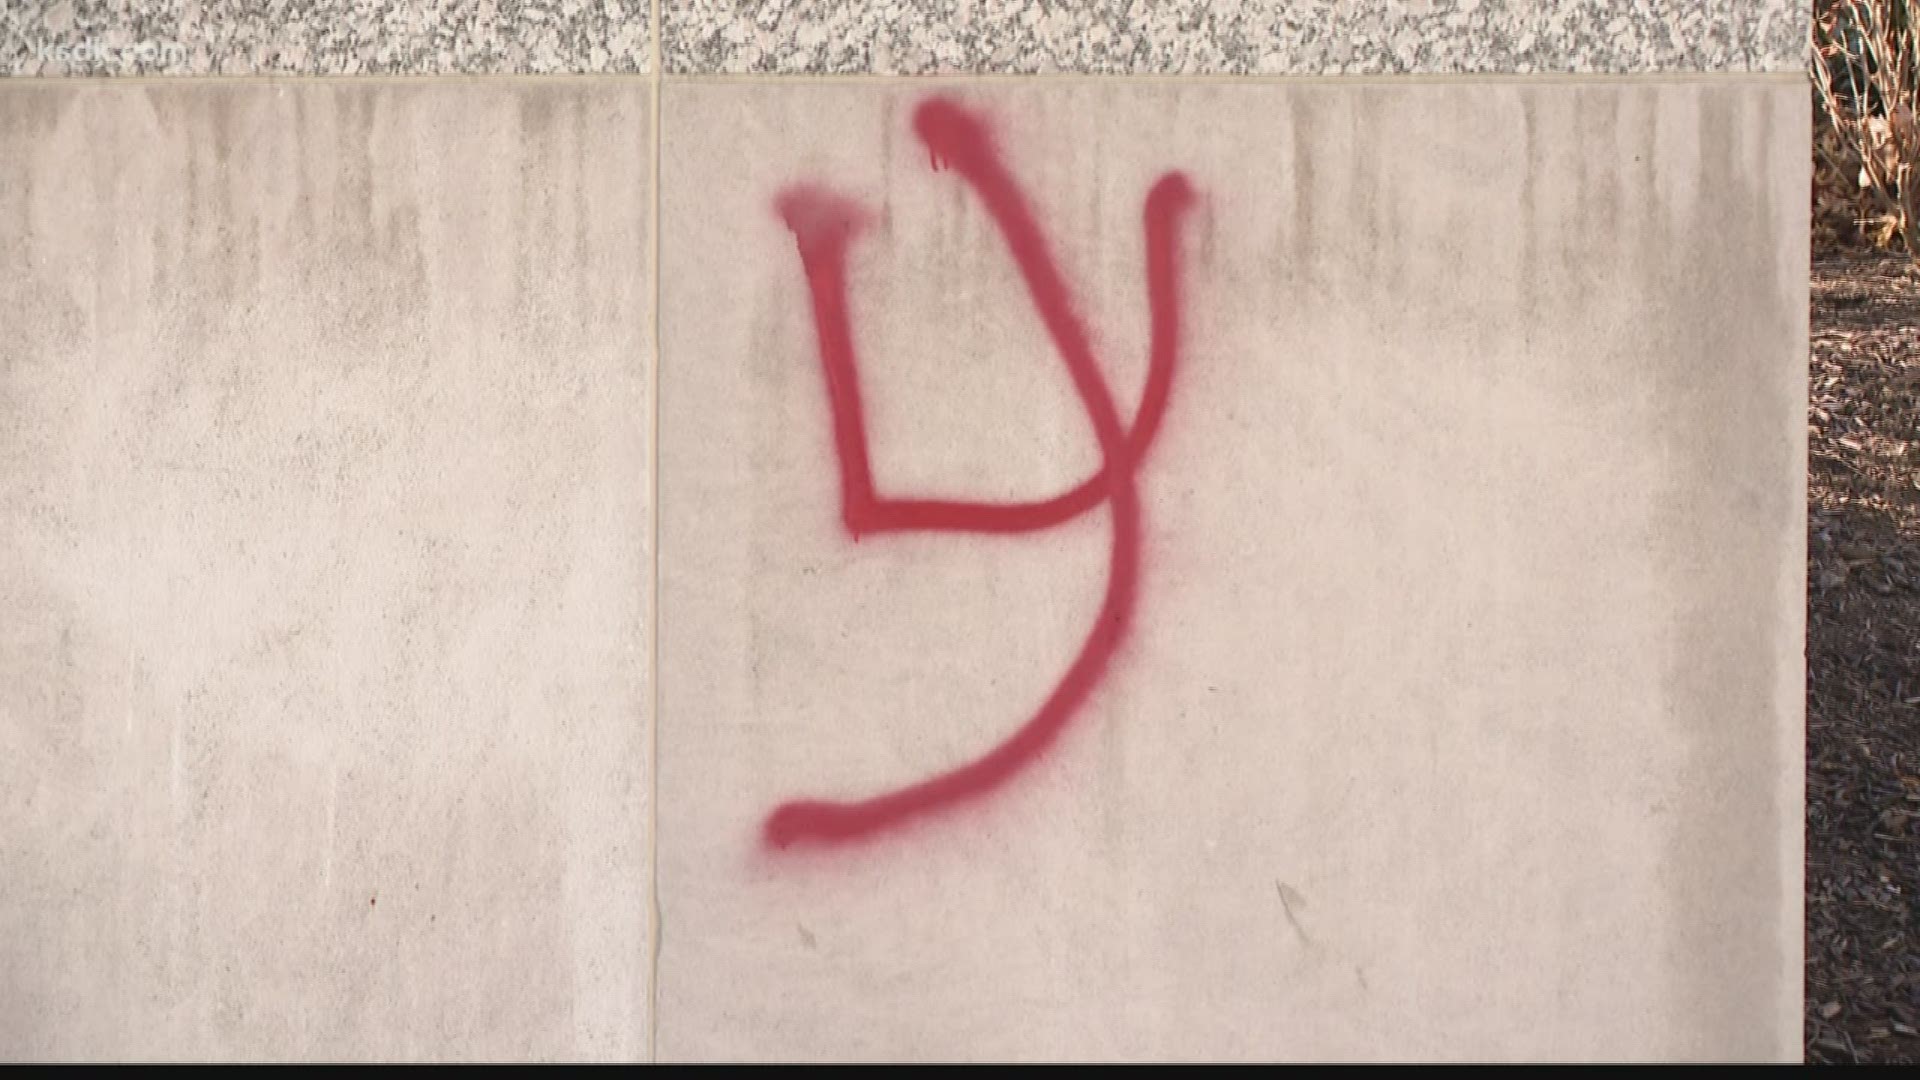 'No War' was spray-painted in several locations